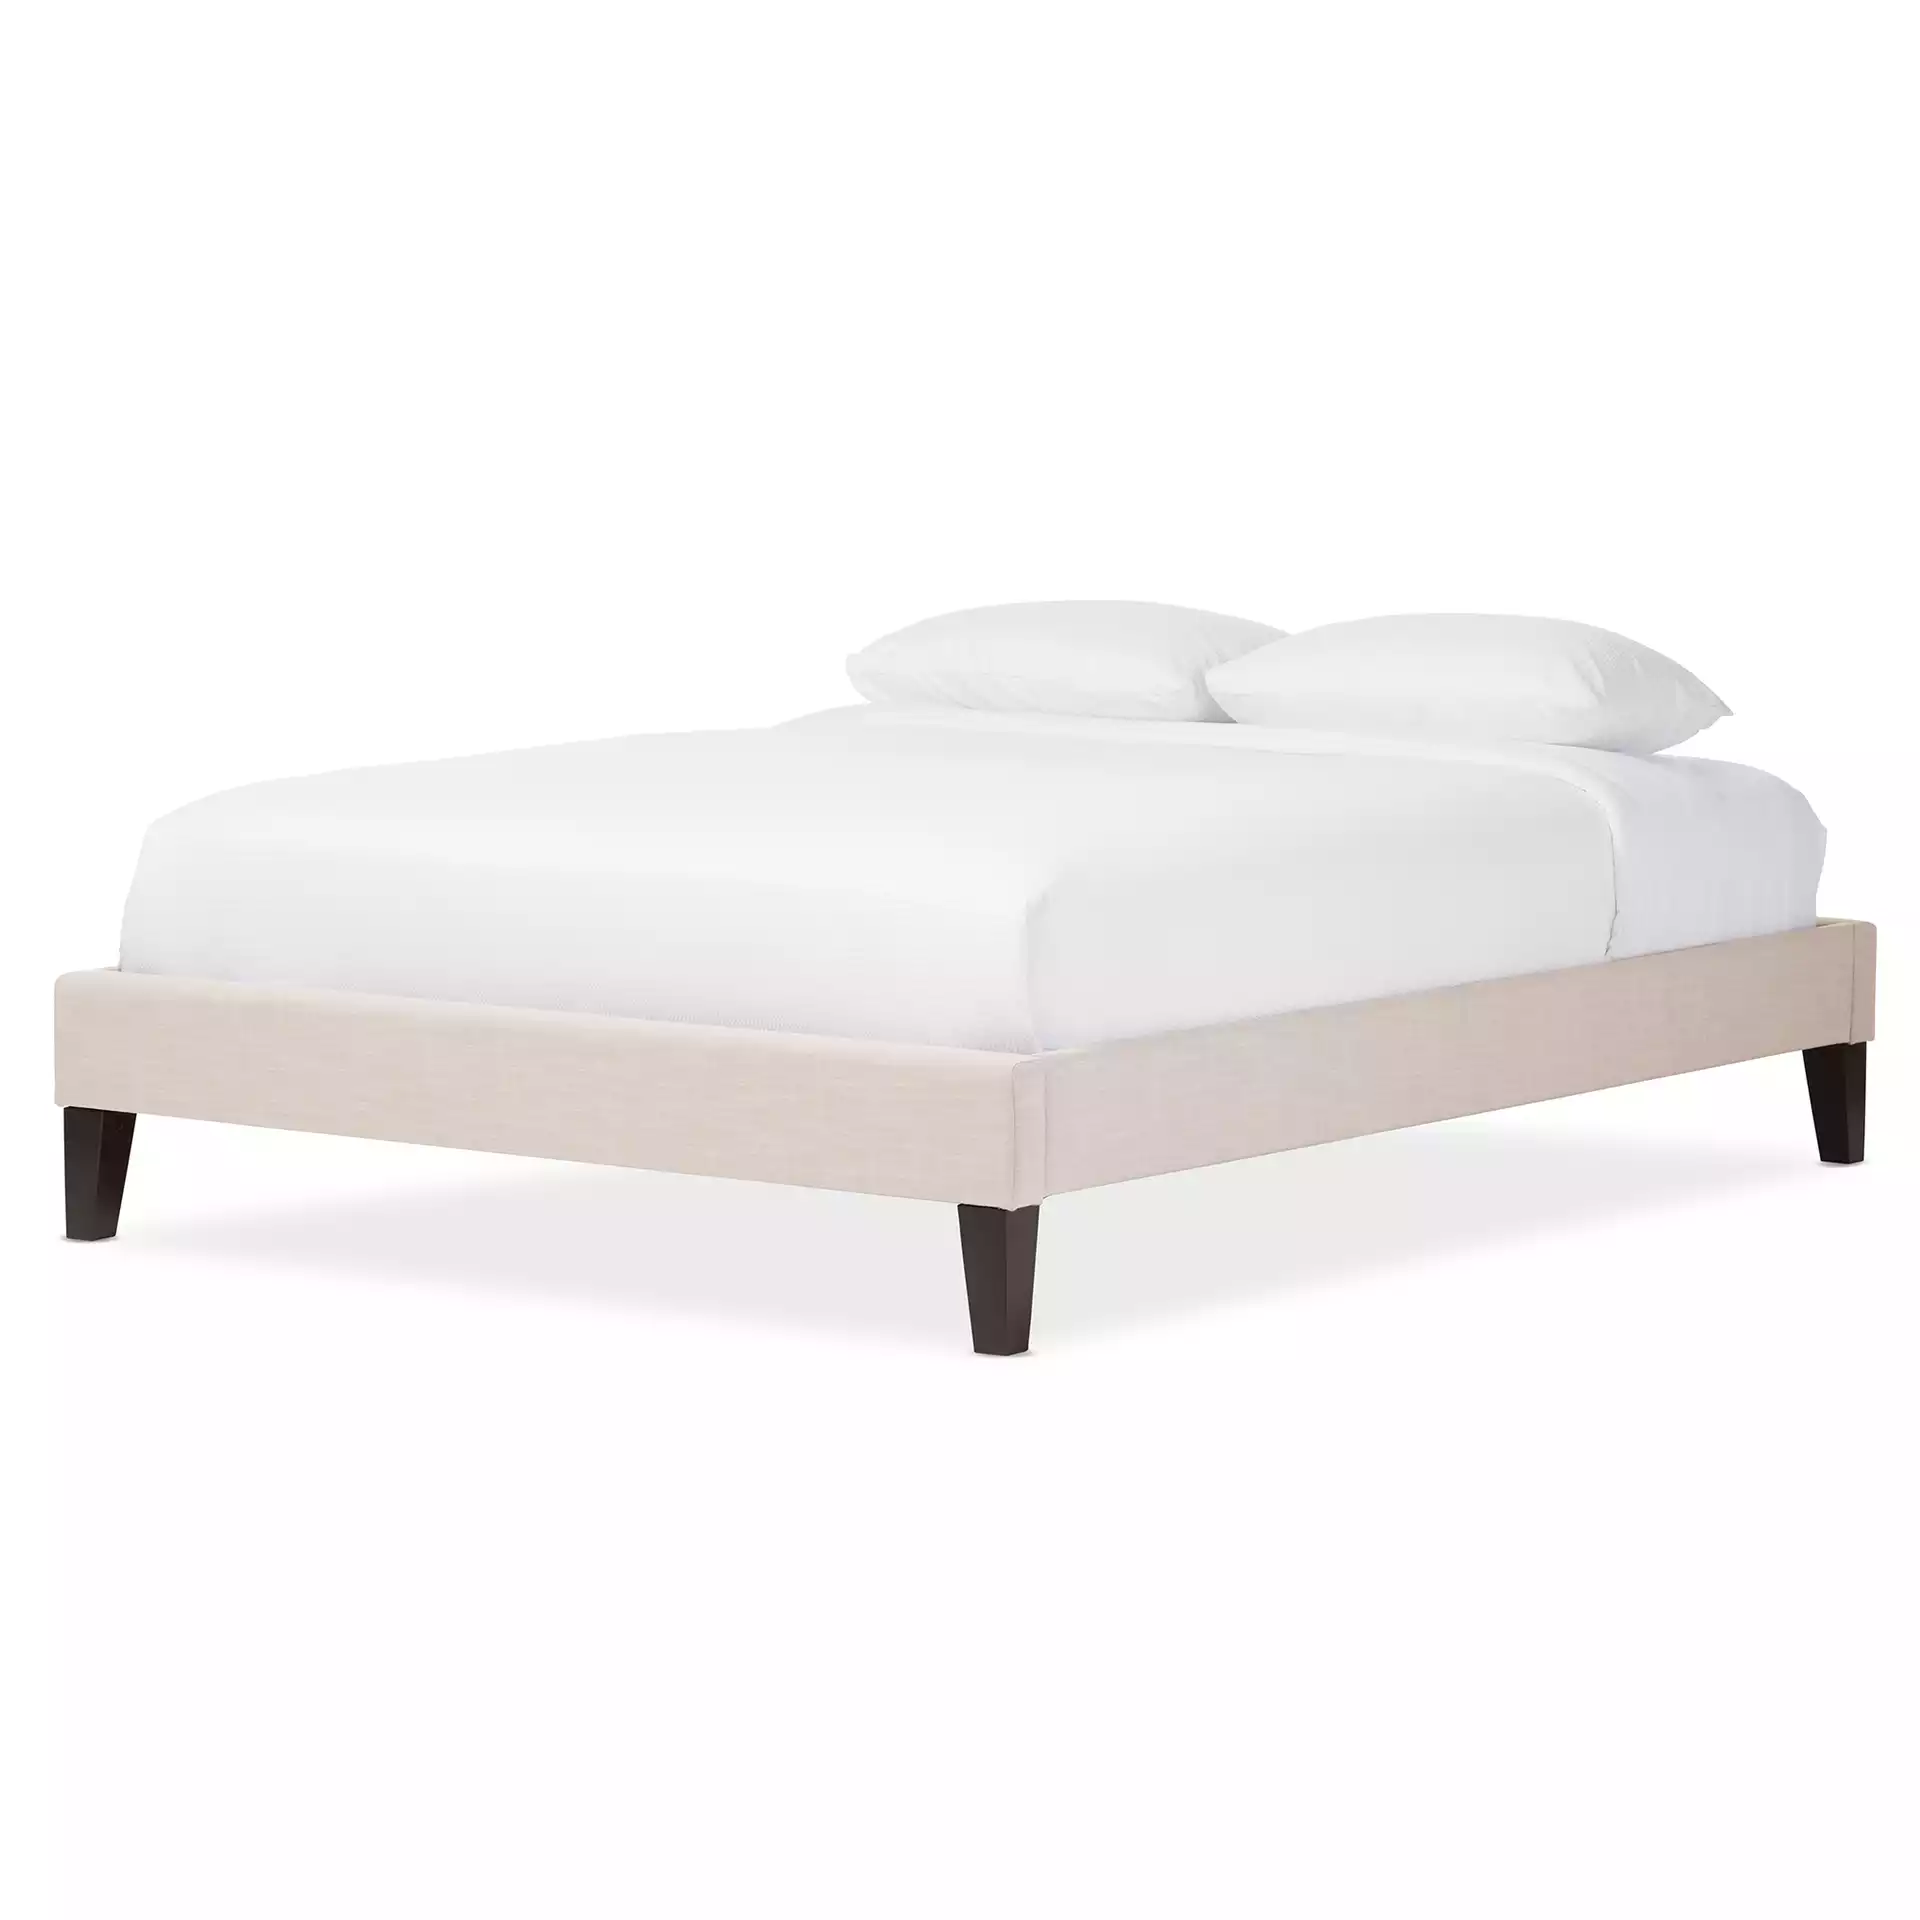 Lancashire Modern and Contemporary Beige Linen Fabric Upholstered King Size Bed Frame with Tapered Legs 